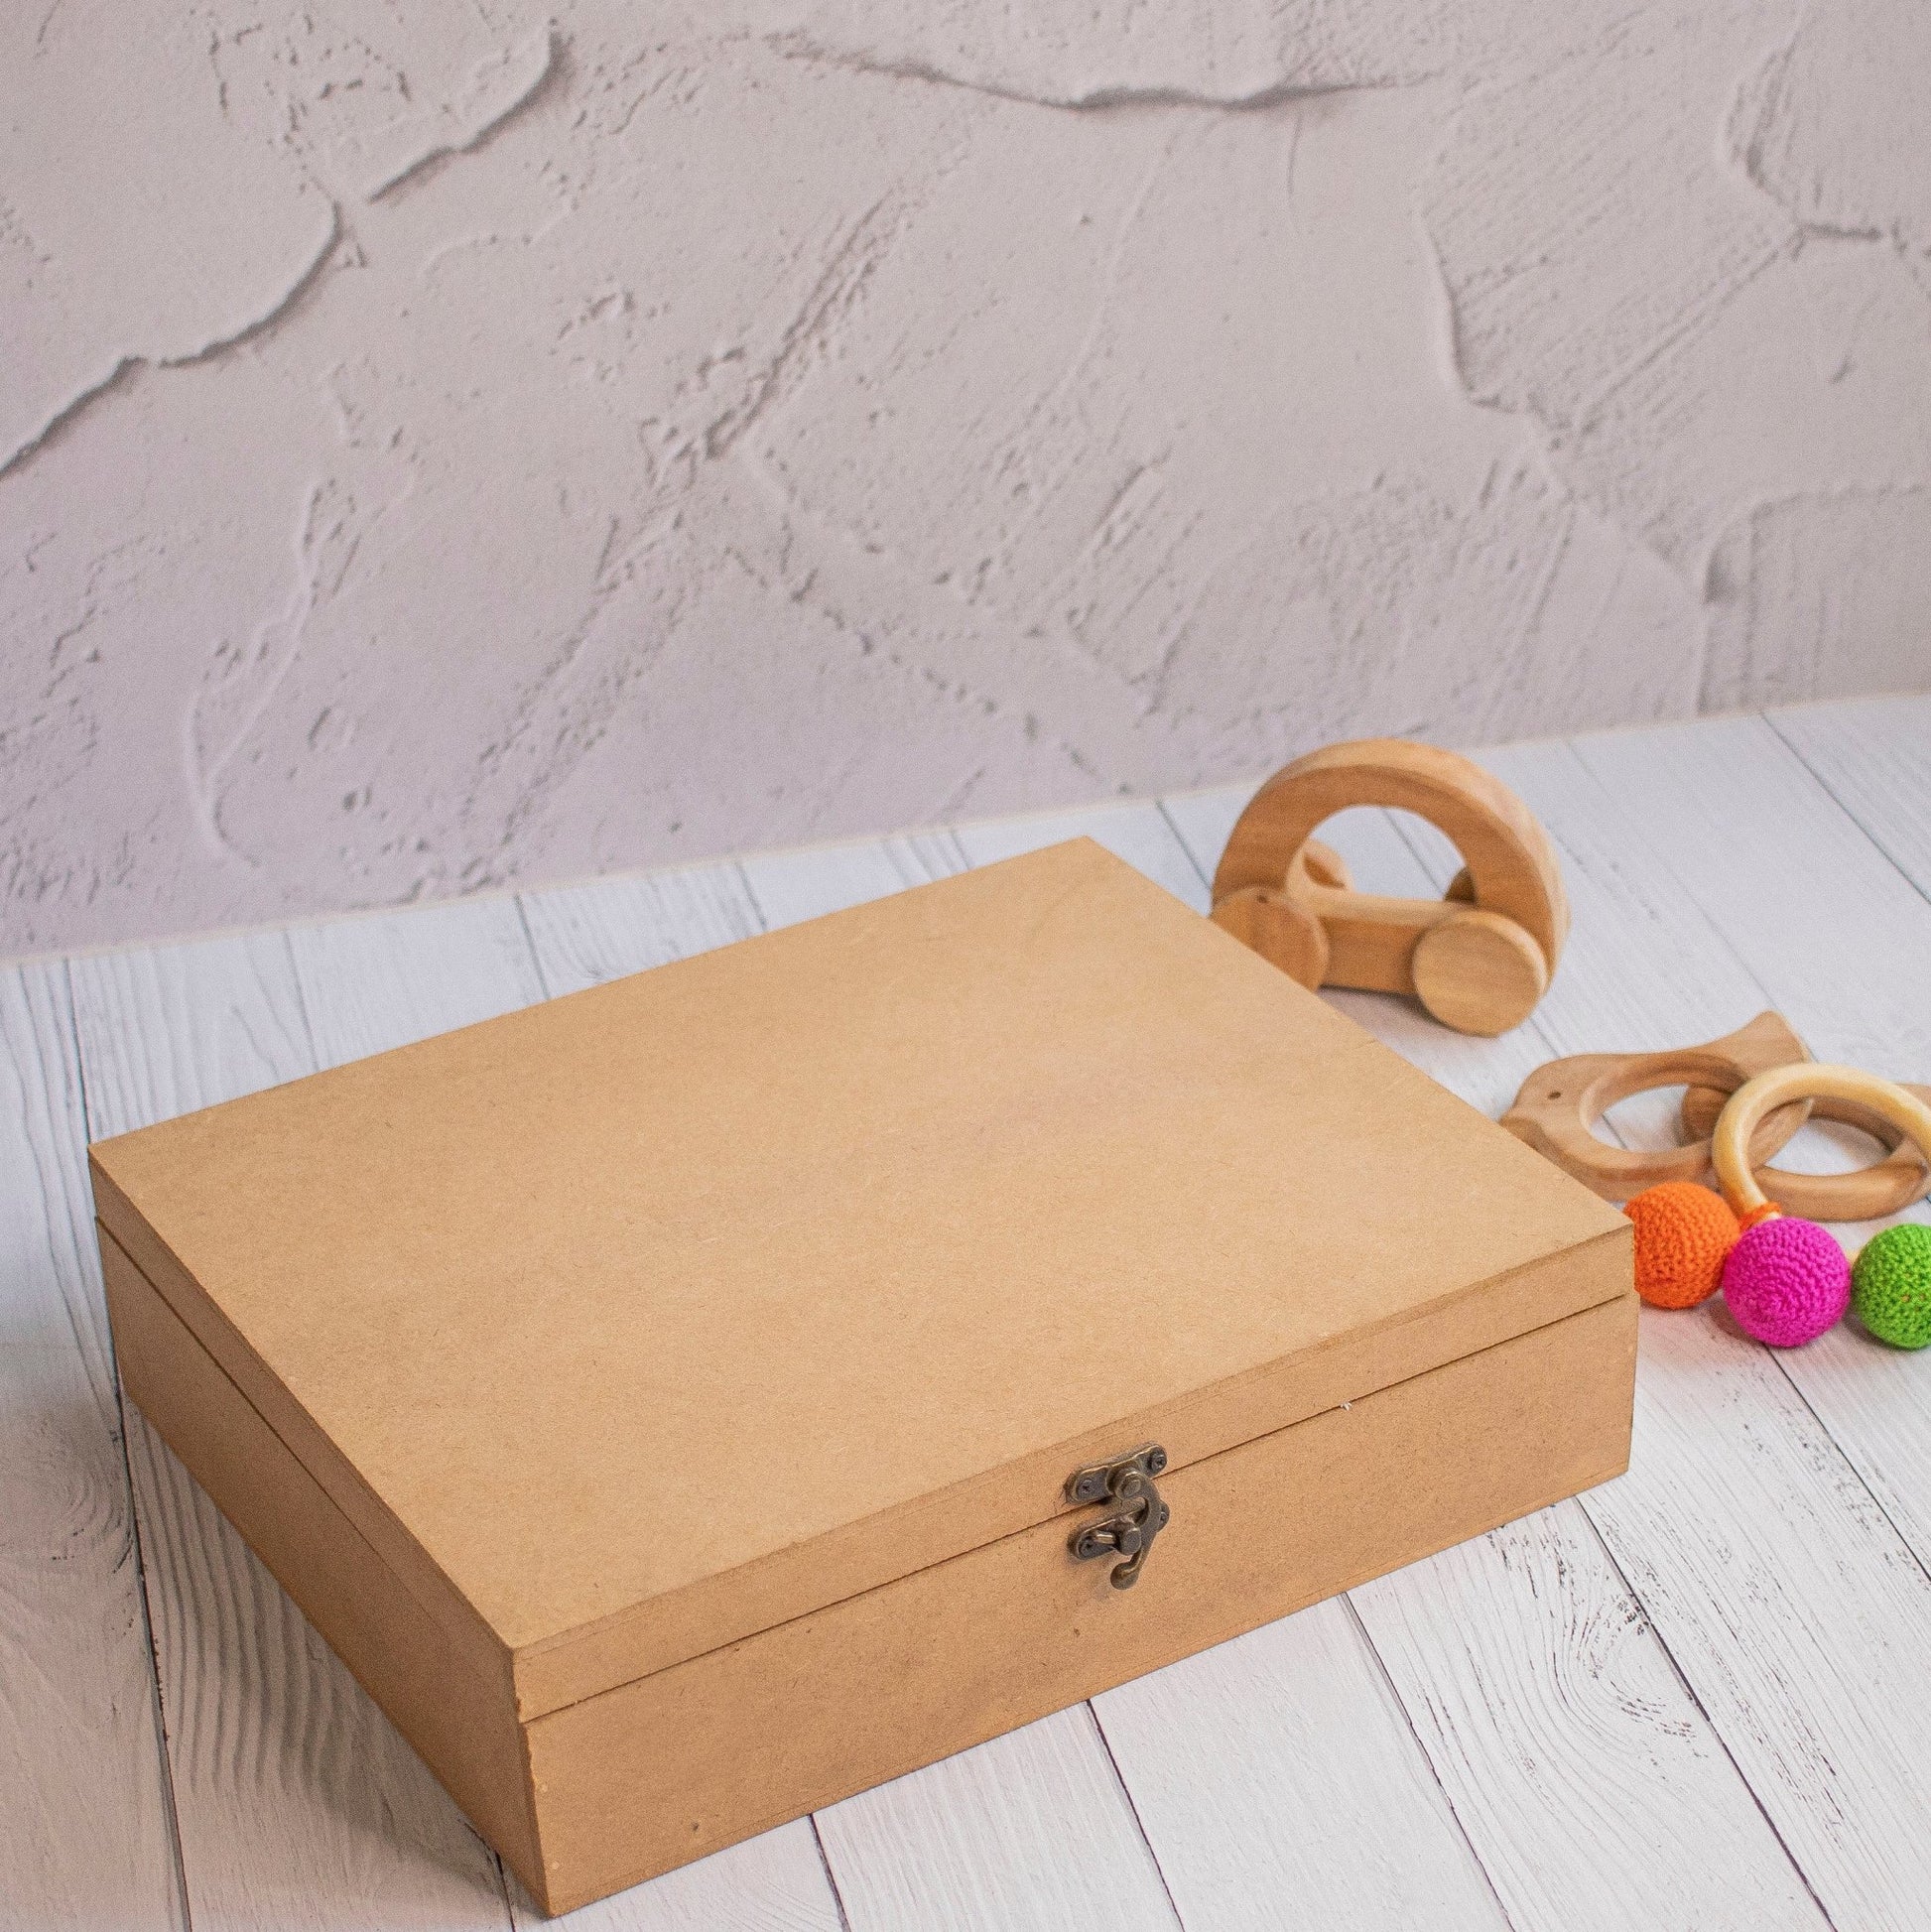 MDF Boxes For Craftwork and Gift Curation - Ebony WoodcraftsGifting Boxes